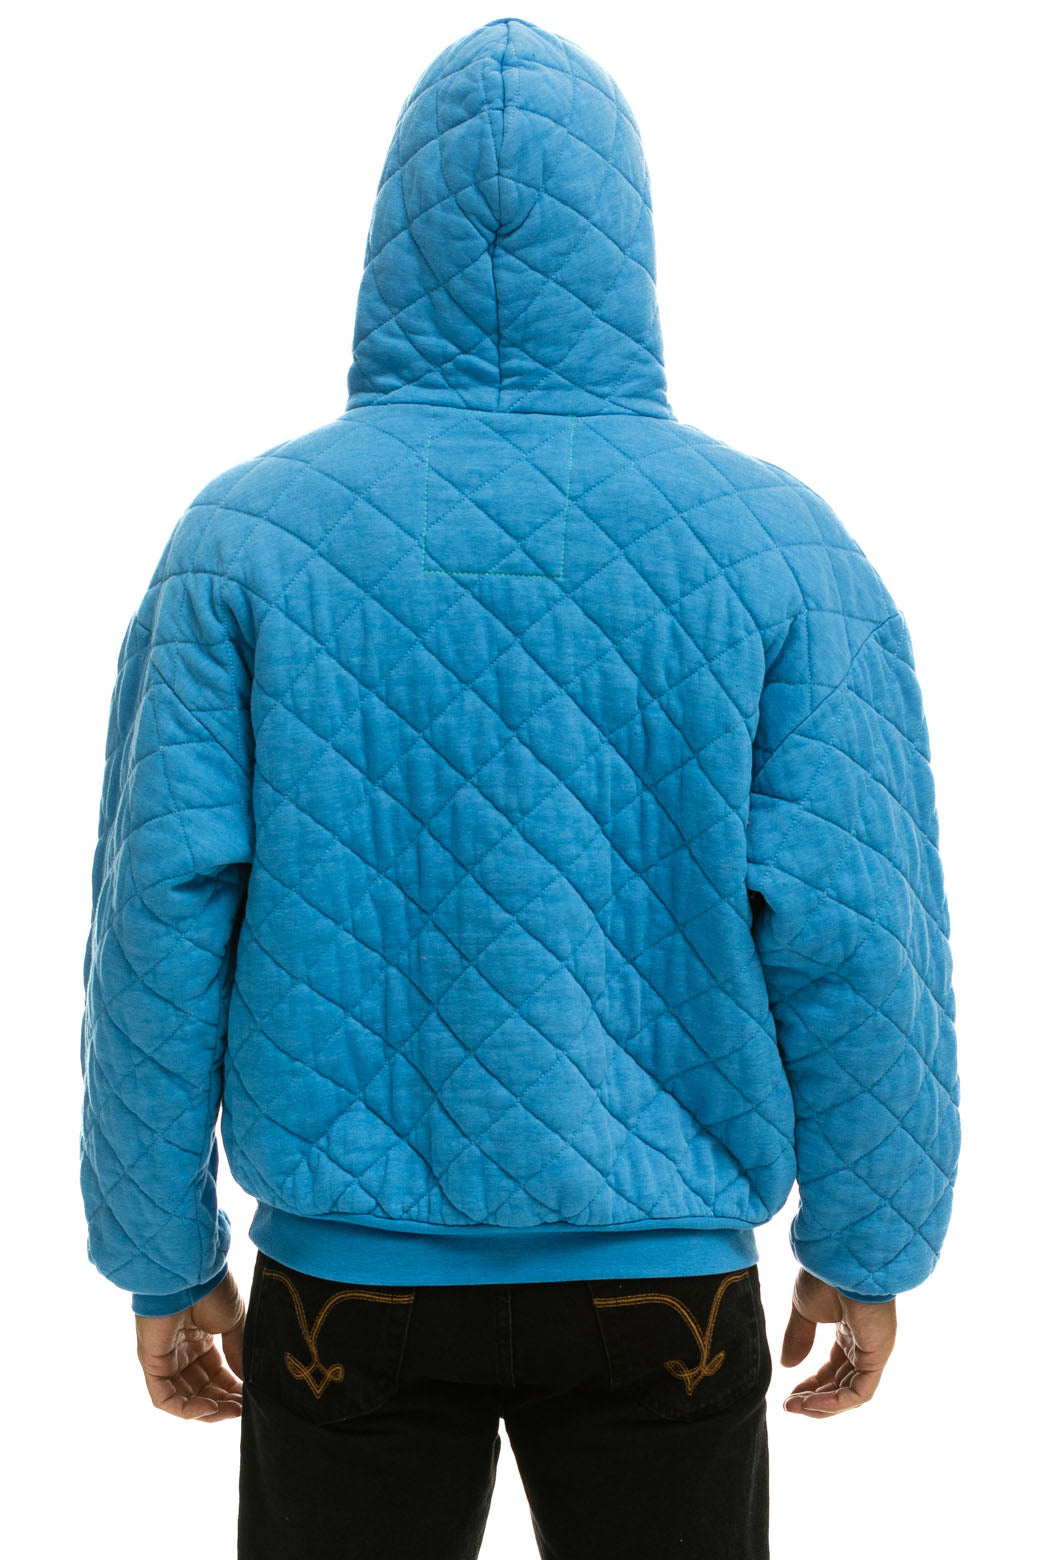 QUILTED SWEATPANTS - OCEAN - Aviator Nation